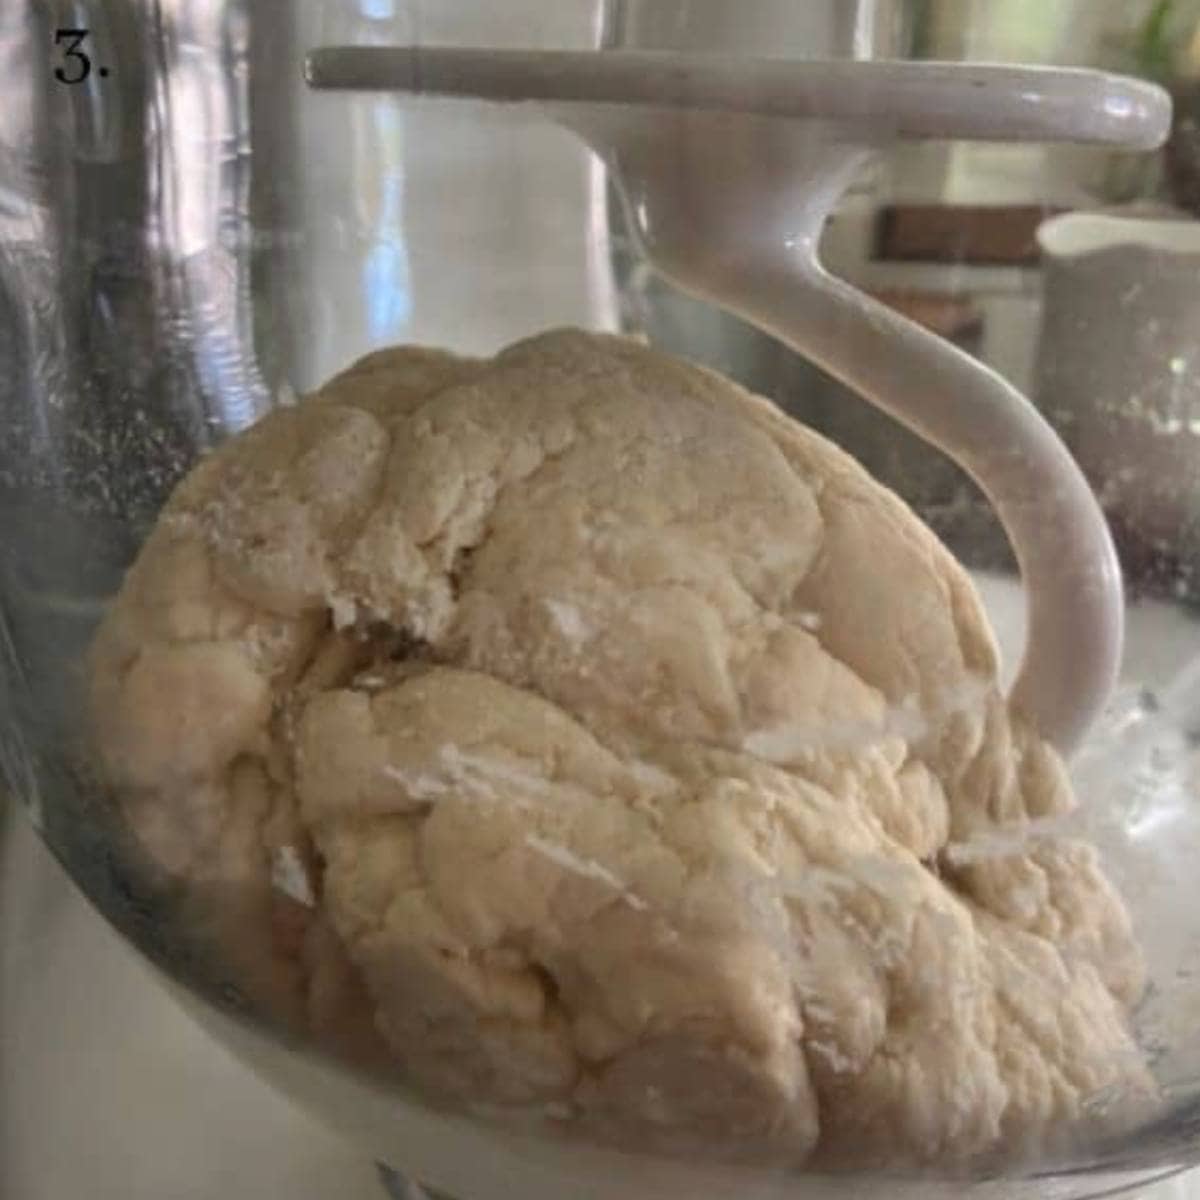 Pizza dough in stand mixer with dough hook attachment.